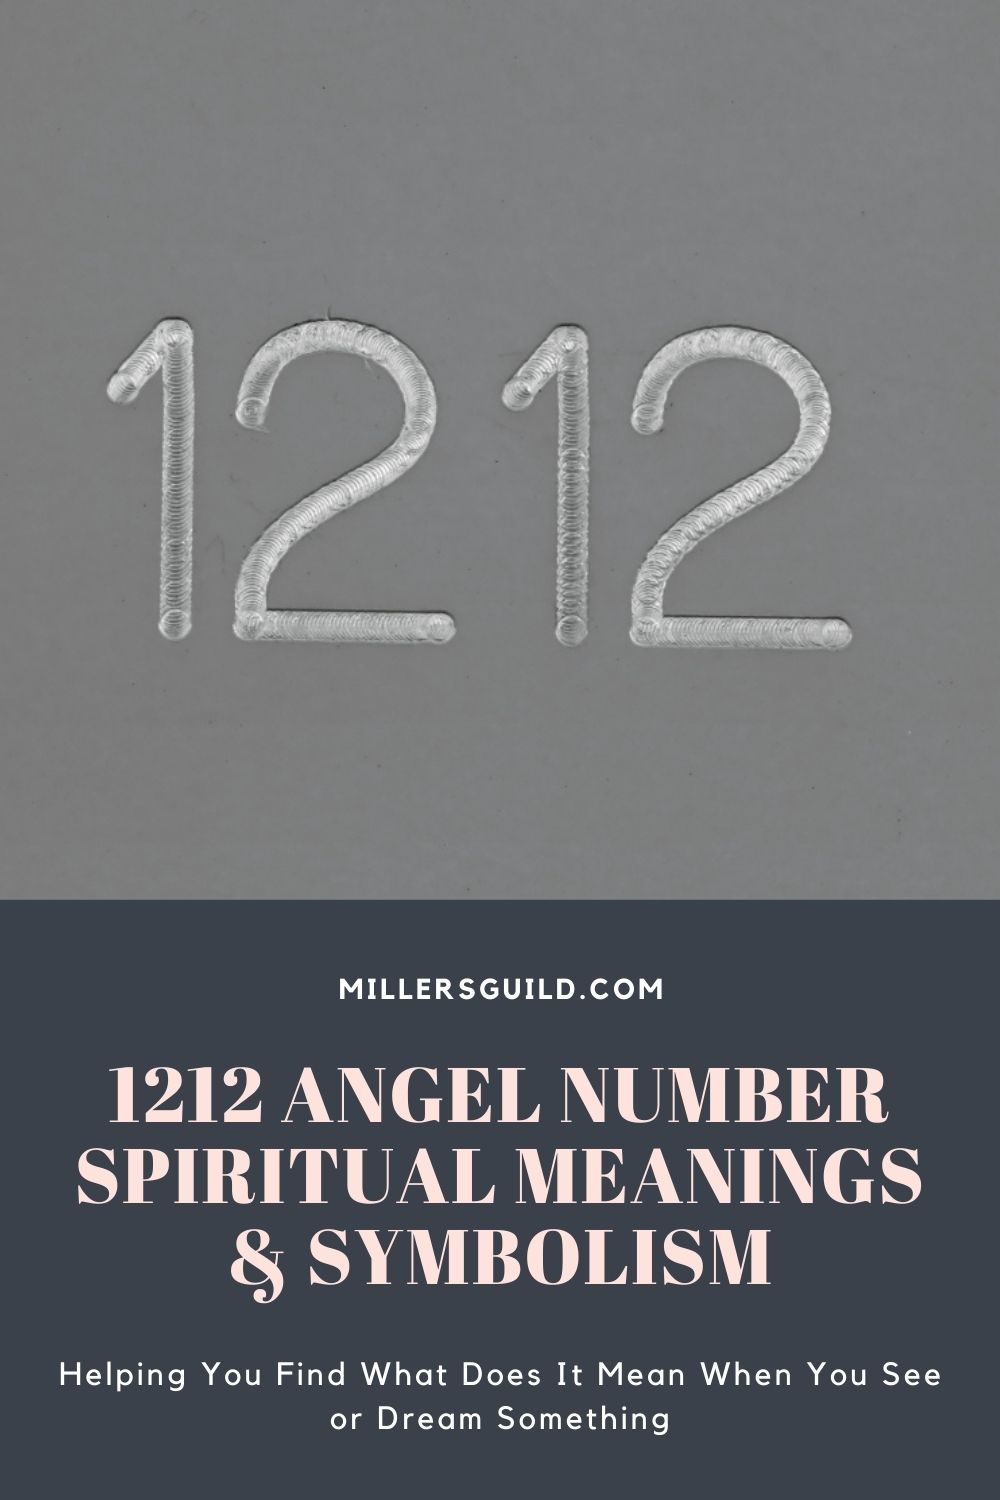 1212 Angel Number Spiritual Meanings & Symbolism 2